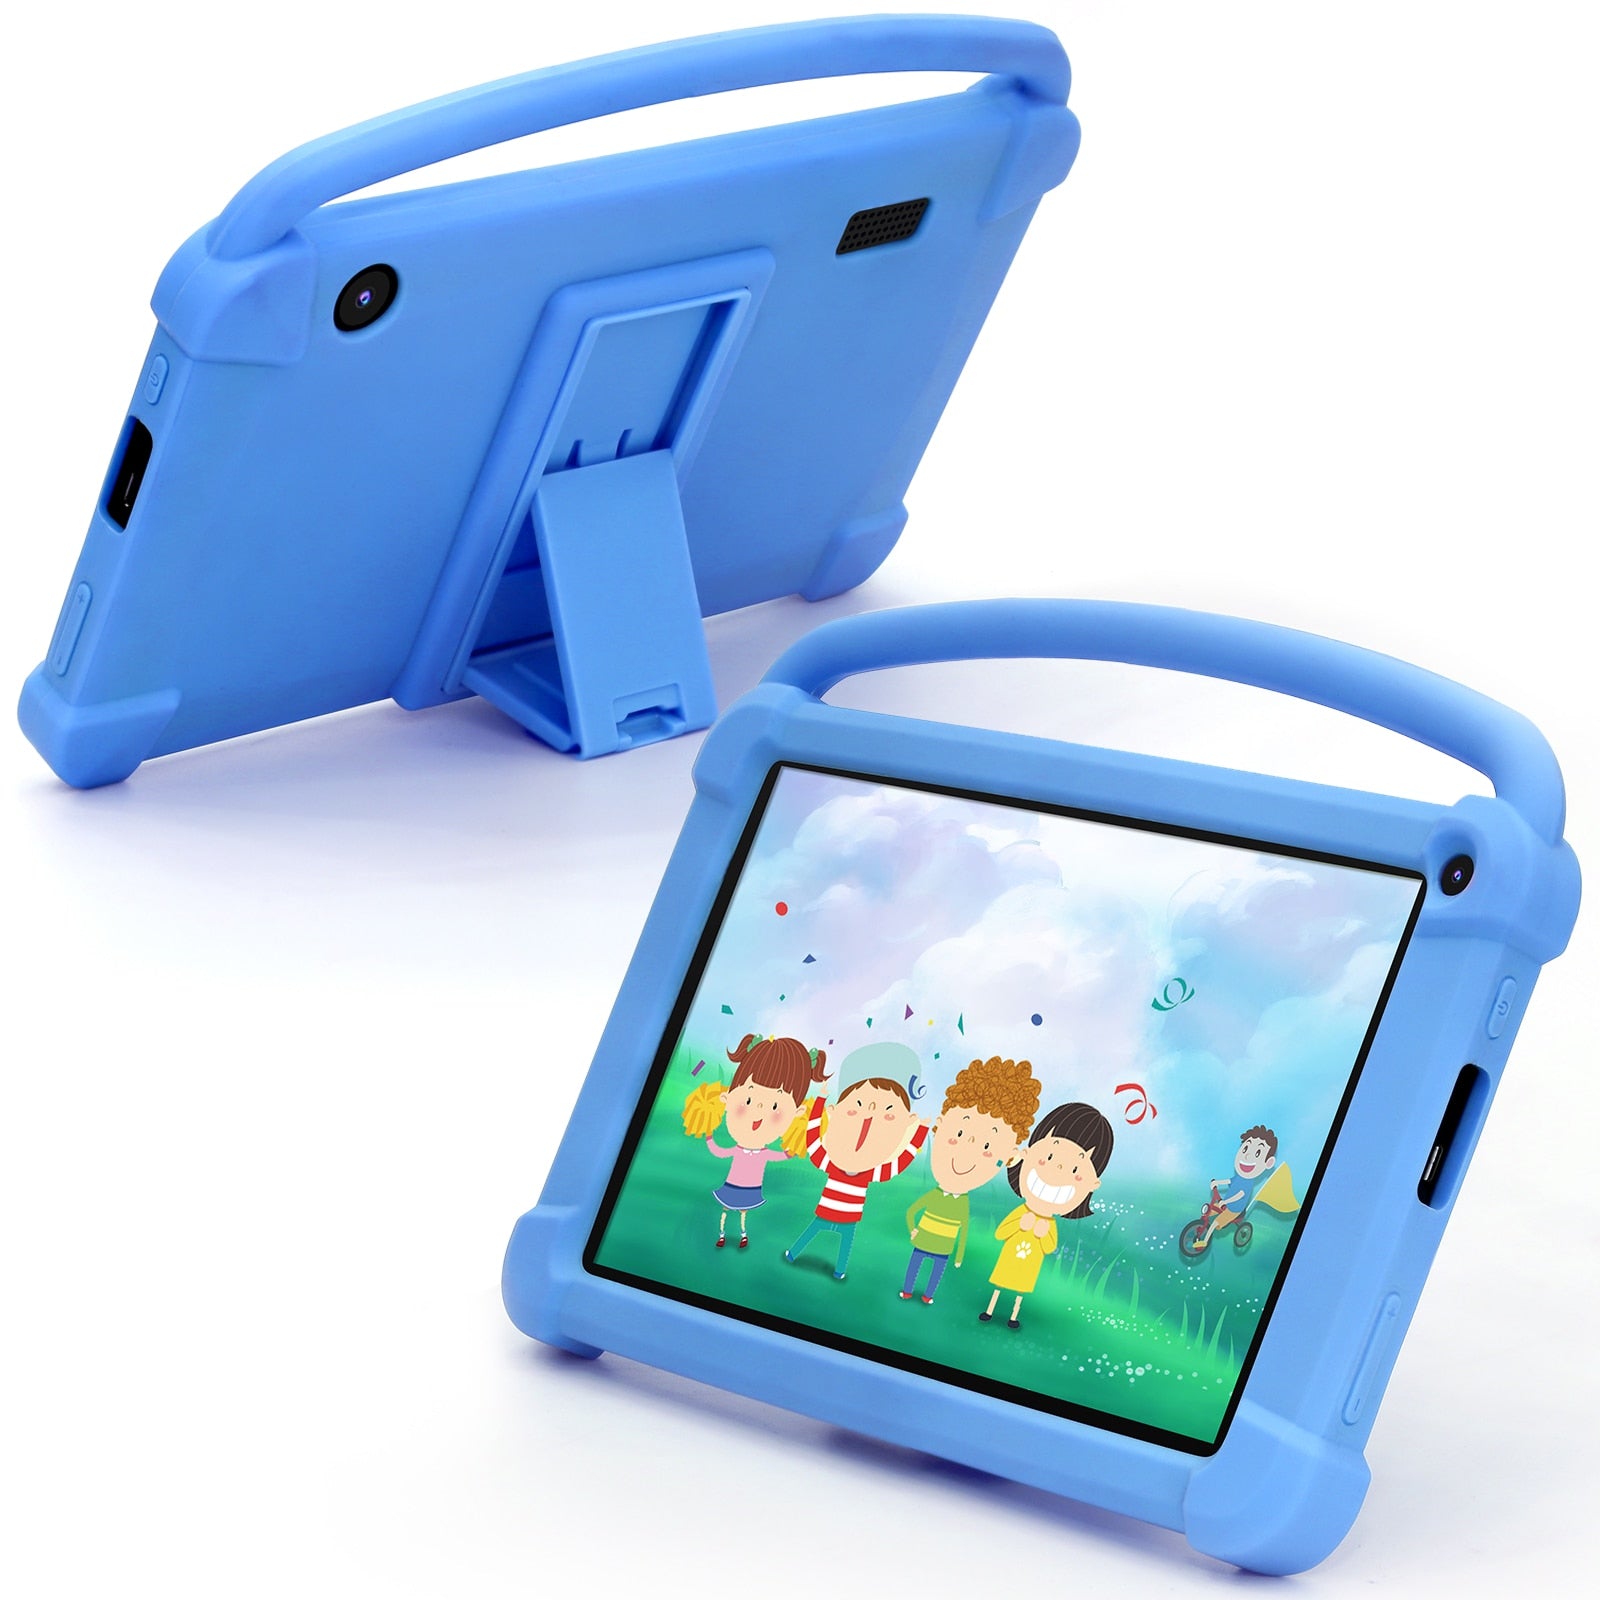 QPS Q1K 7 inch Android Kids  Tablet 2800mah 1GB 16GBROM WIFI Quad Core Android 10